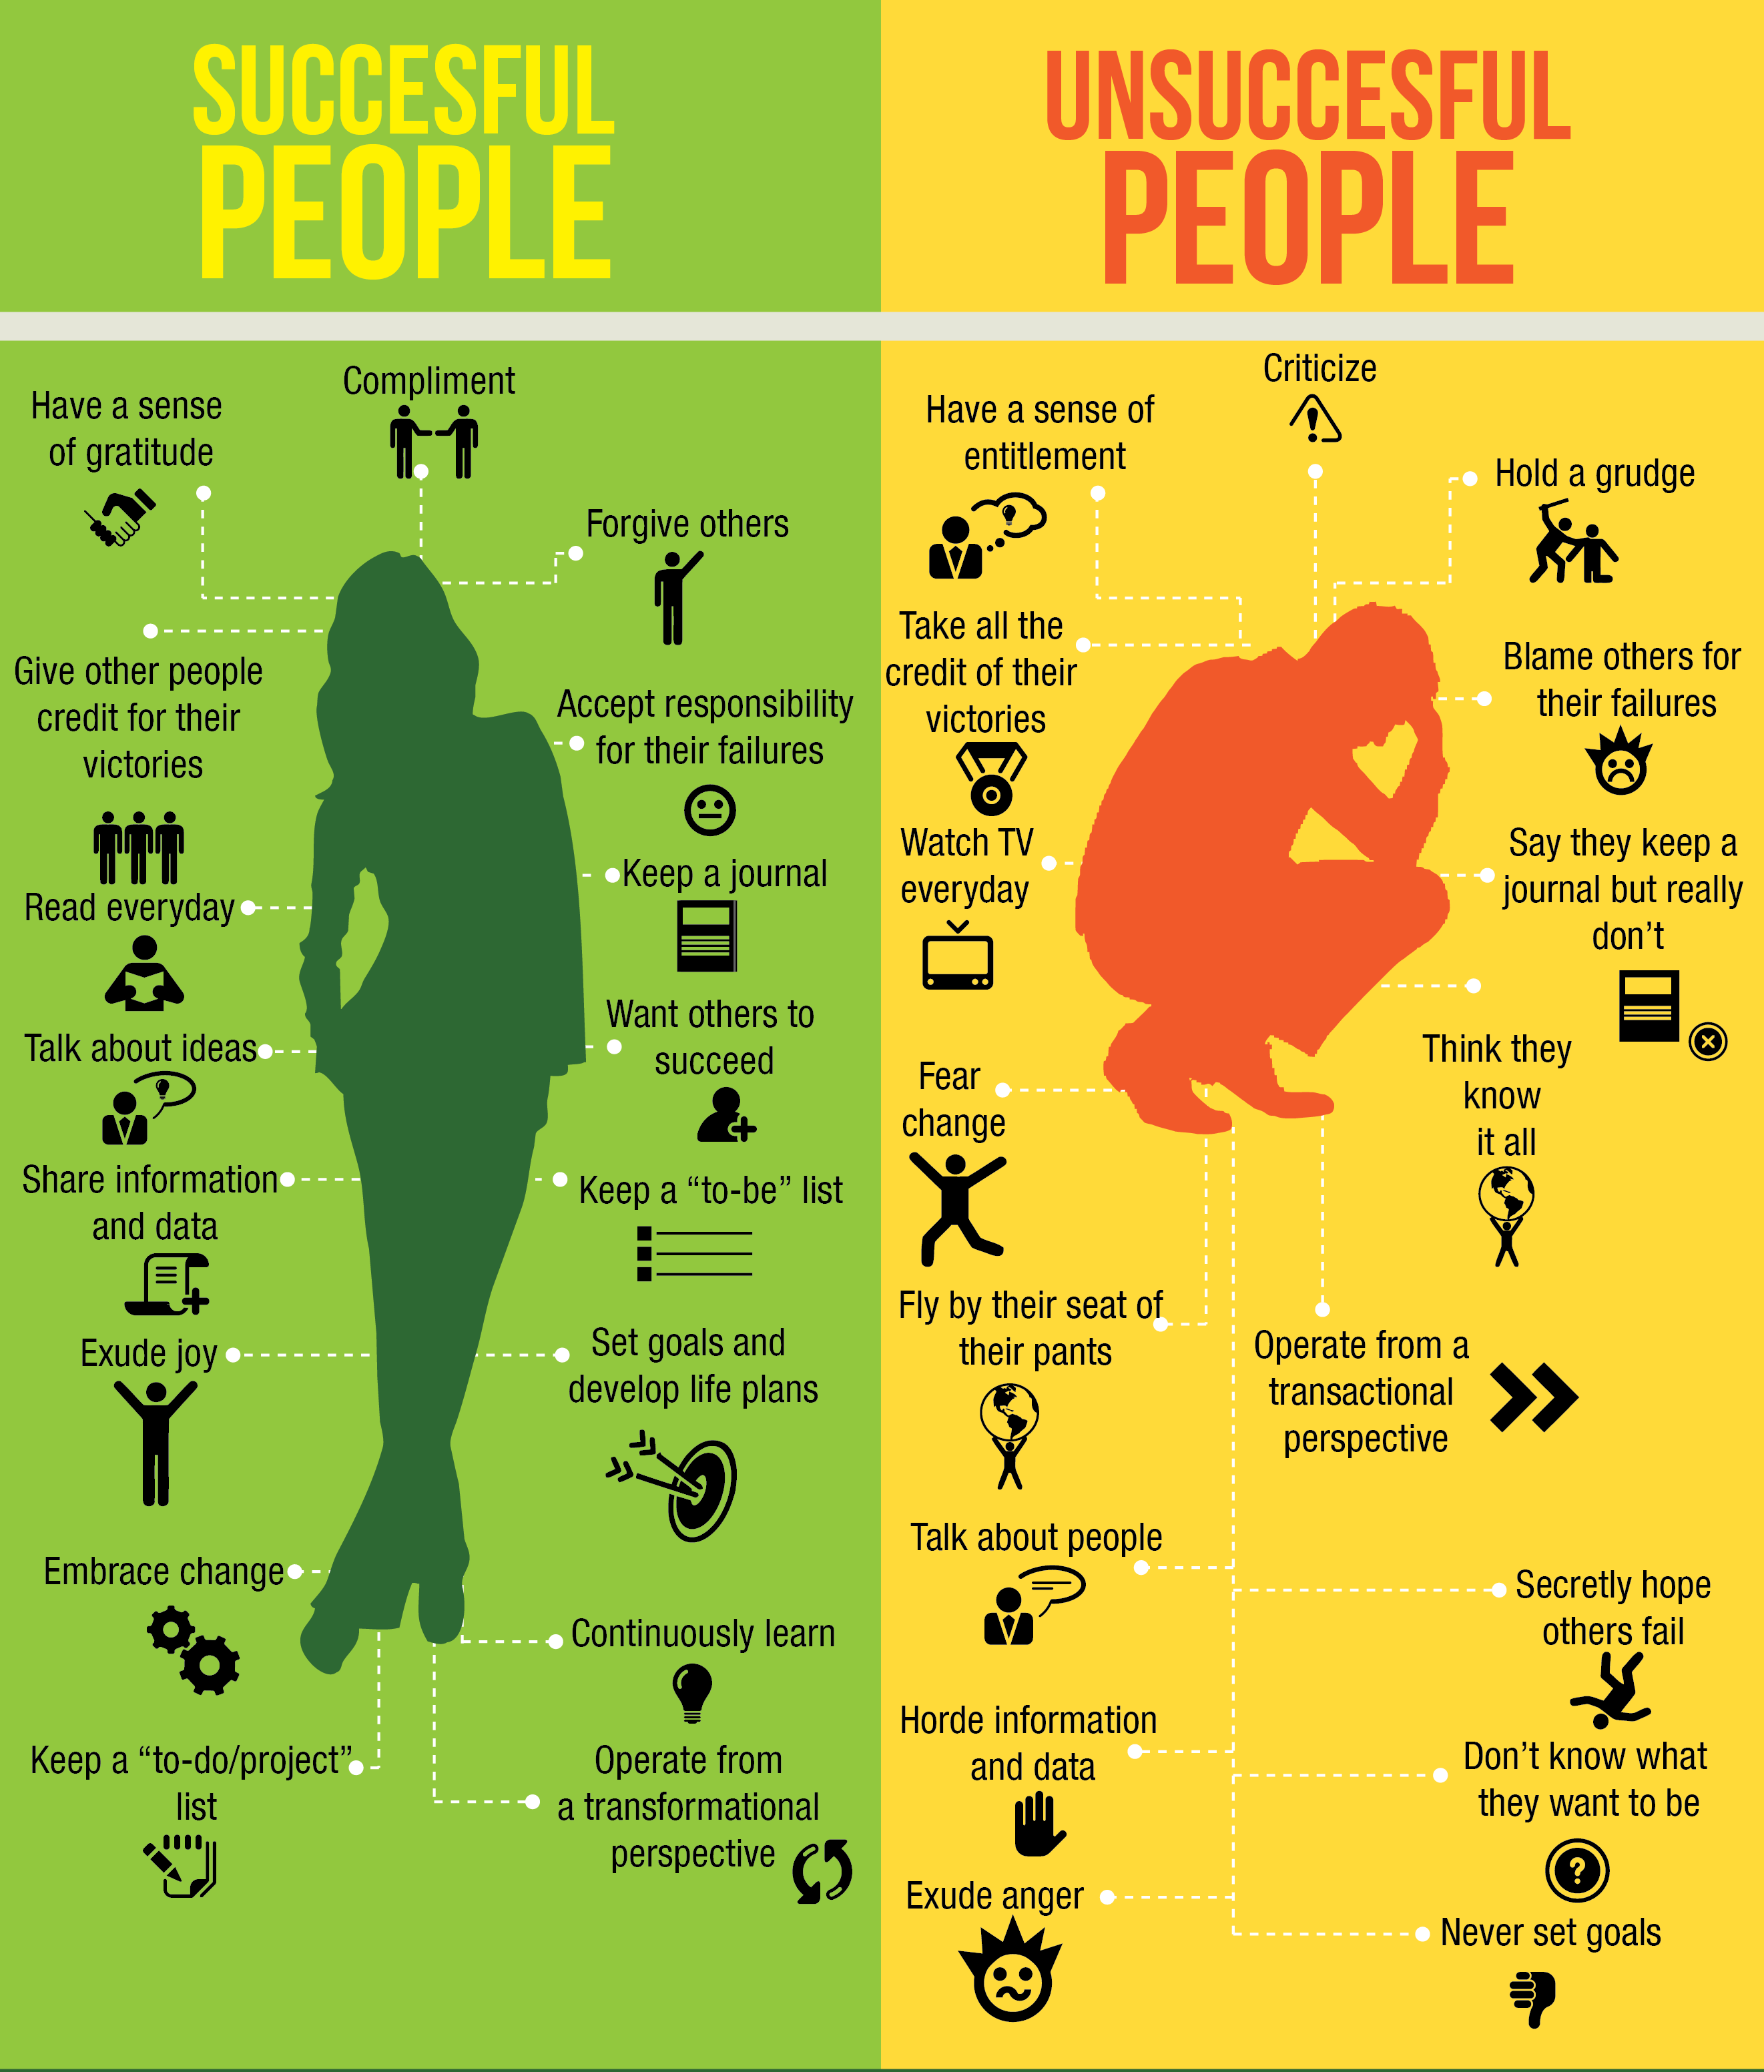 What Successful People Do and What Unsuccessful People Do